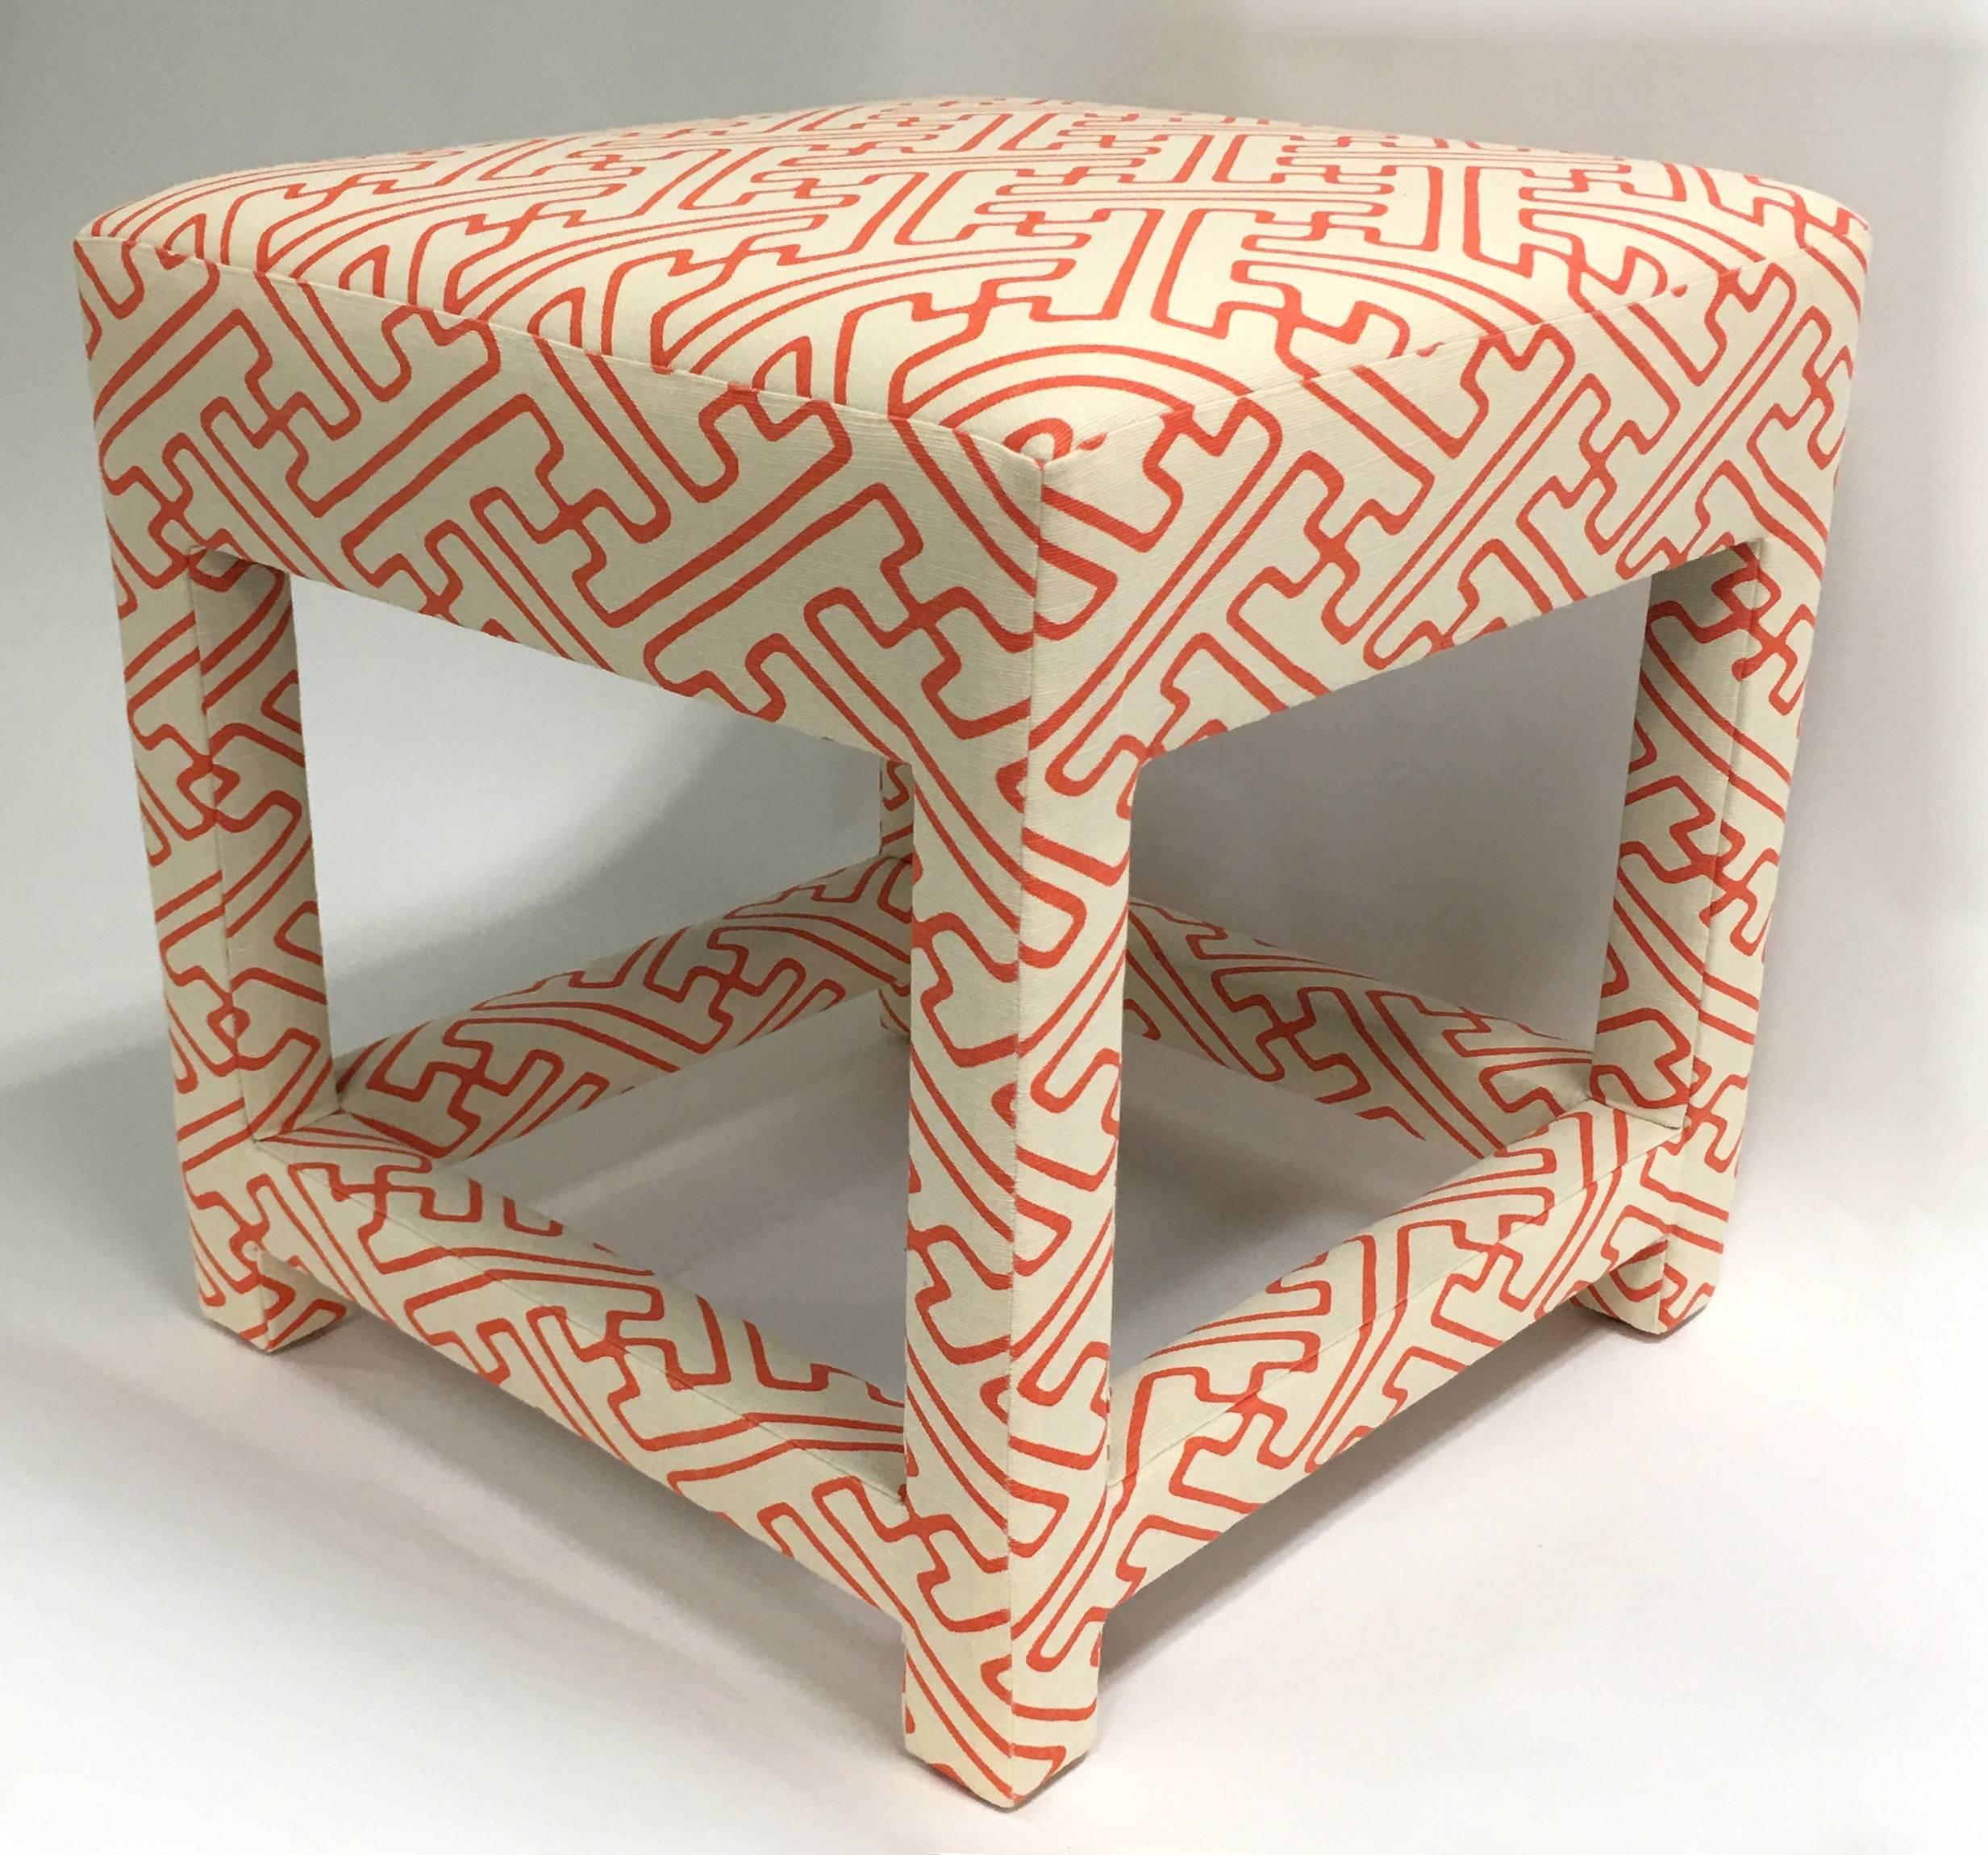 1970s David Hicks style parsons stool. Newly upholstered in Quadrille Alan Campbell 'Saya Gata' in orange linen on tint.